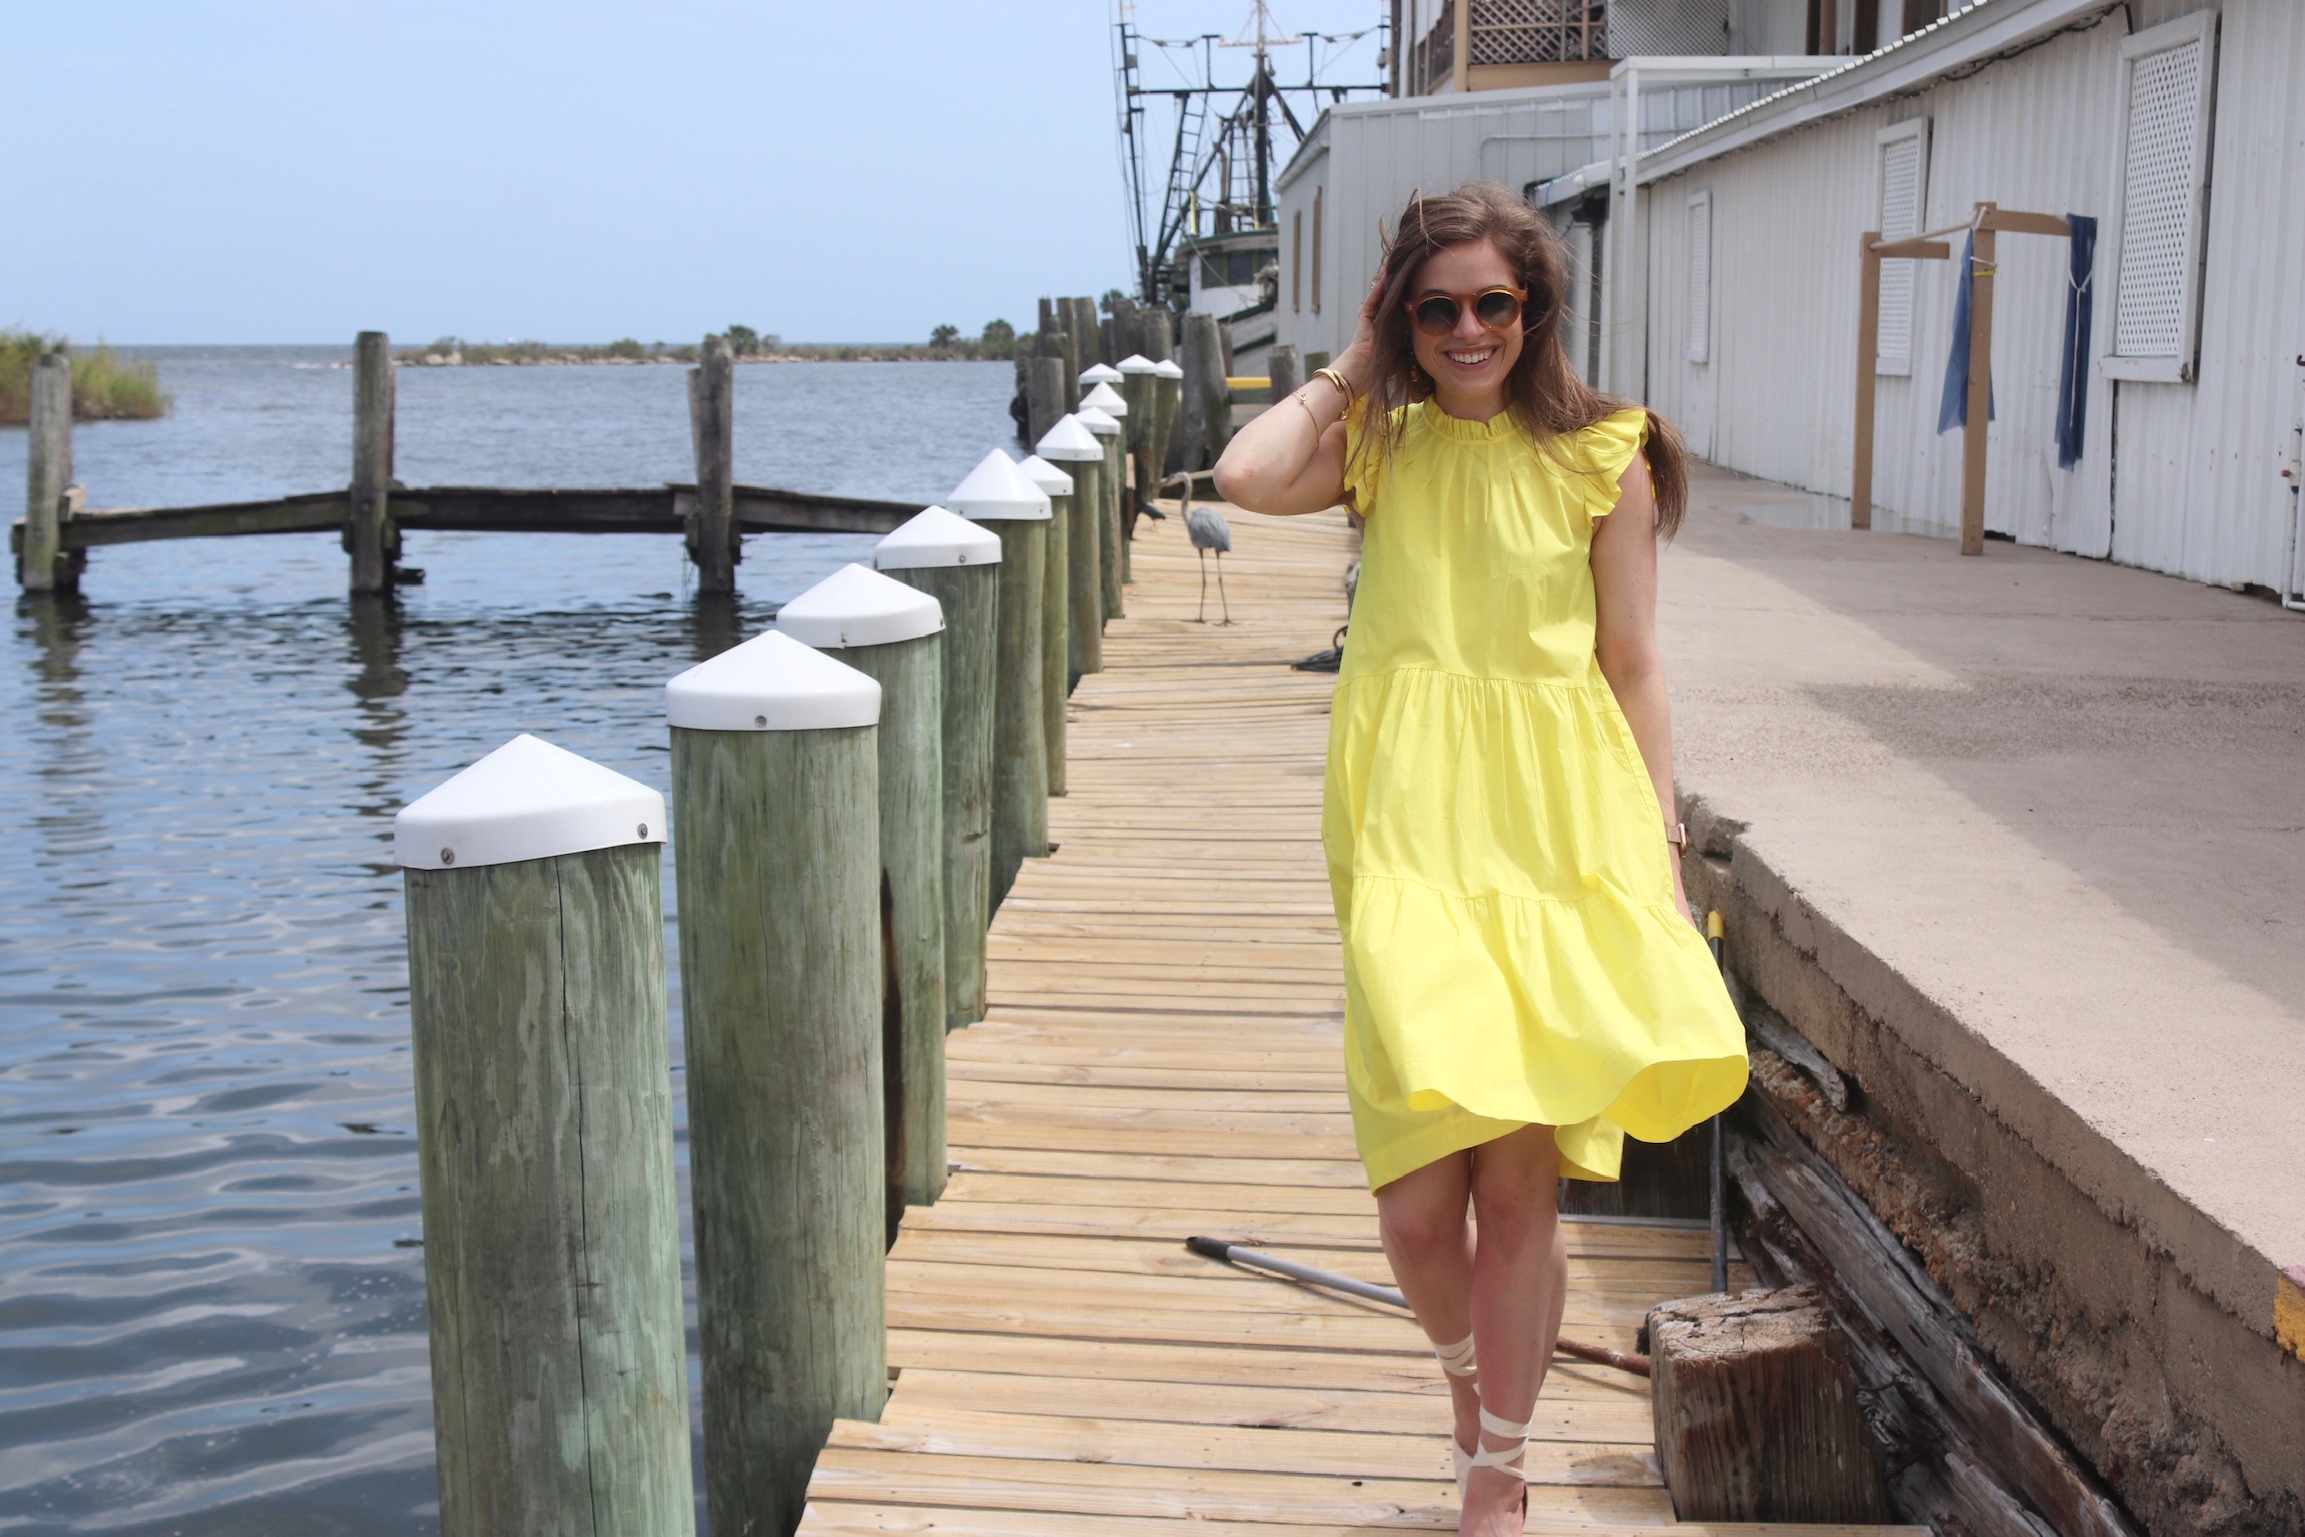 Girl walking down a dock wearing a pink dress & espadrilles with brown hair. A blue heron is behind her